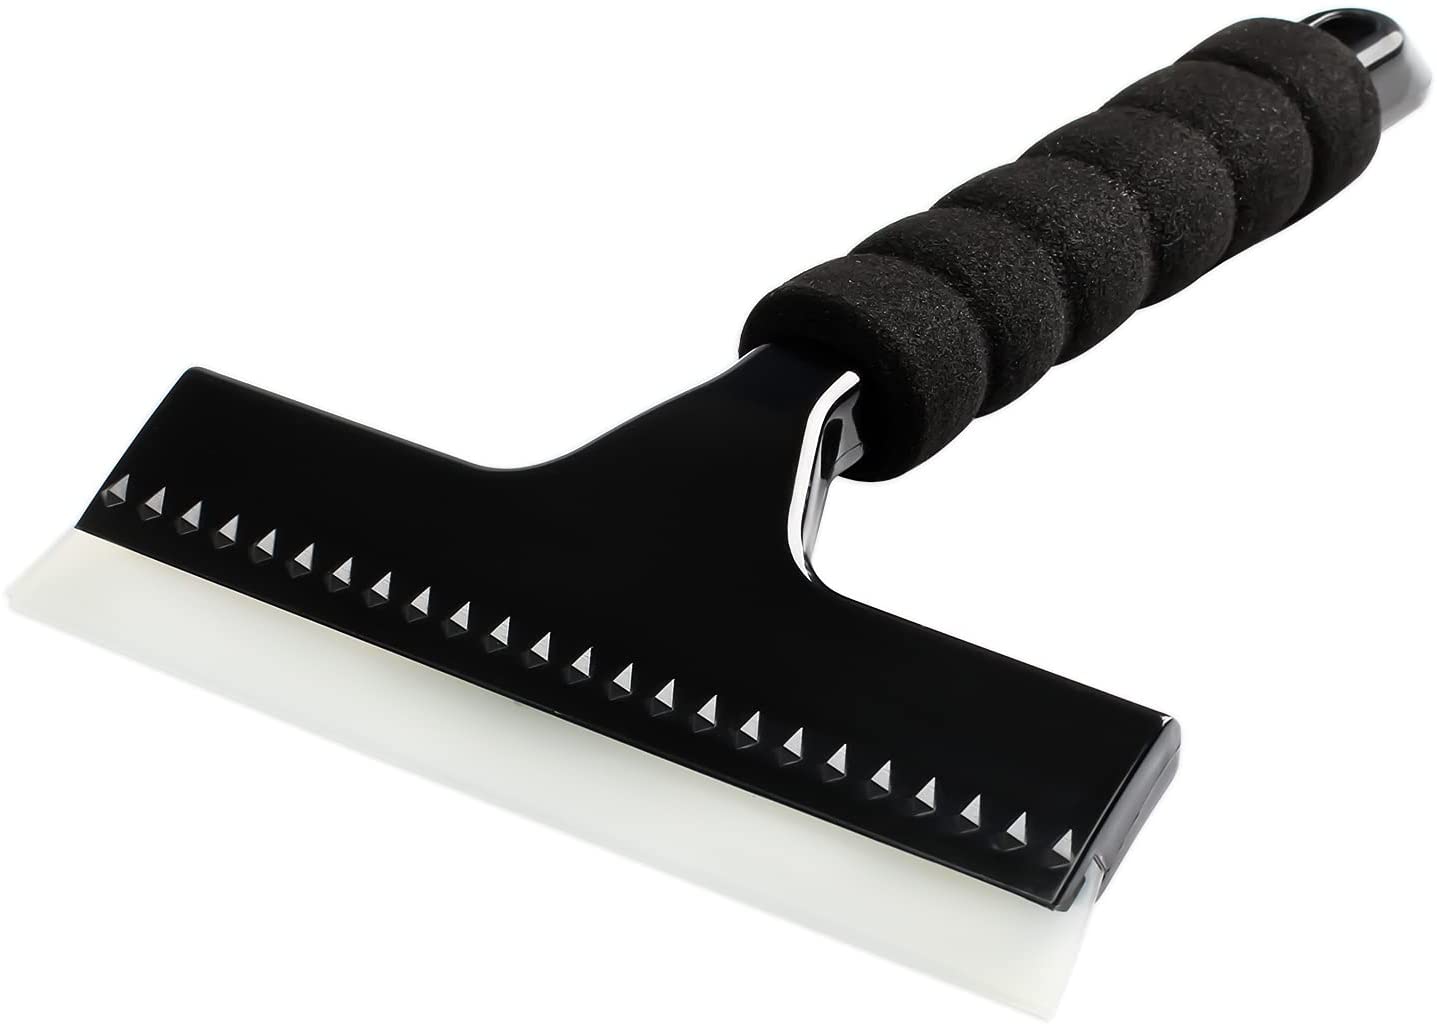 Hand Held Squeegee for Windows and Glass